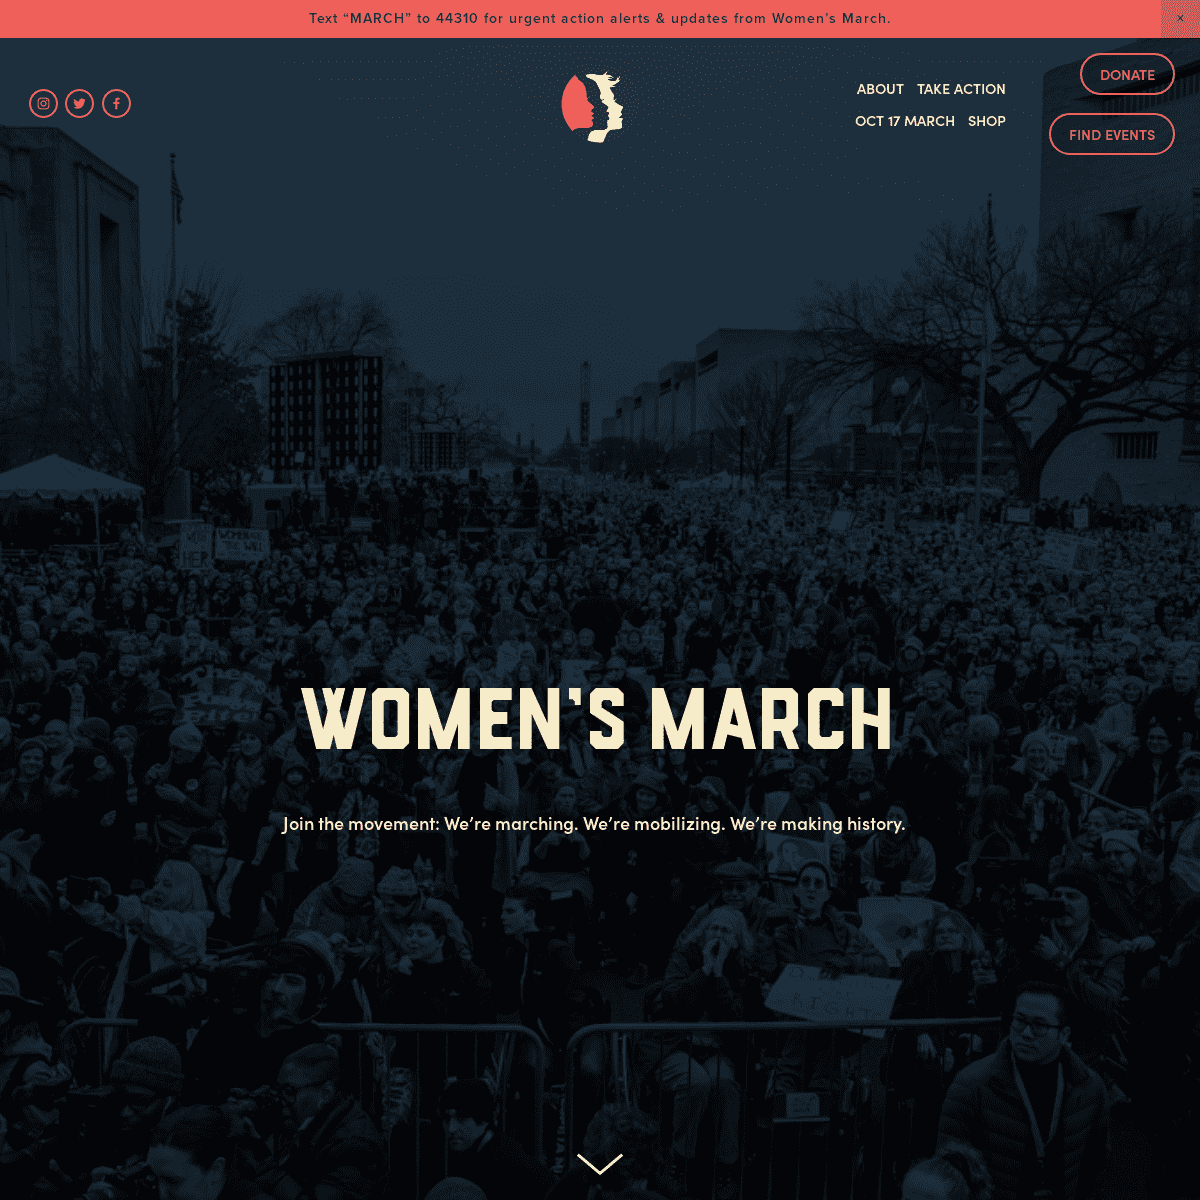 A complete backup of womensmarch.com